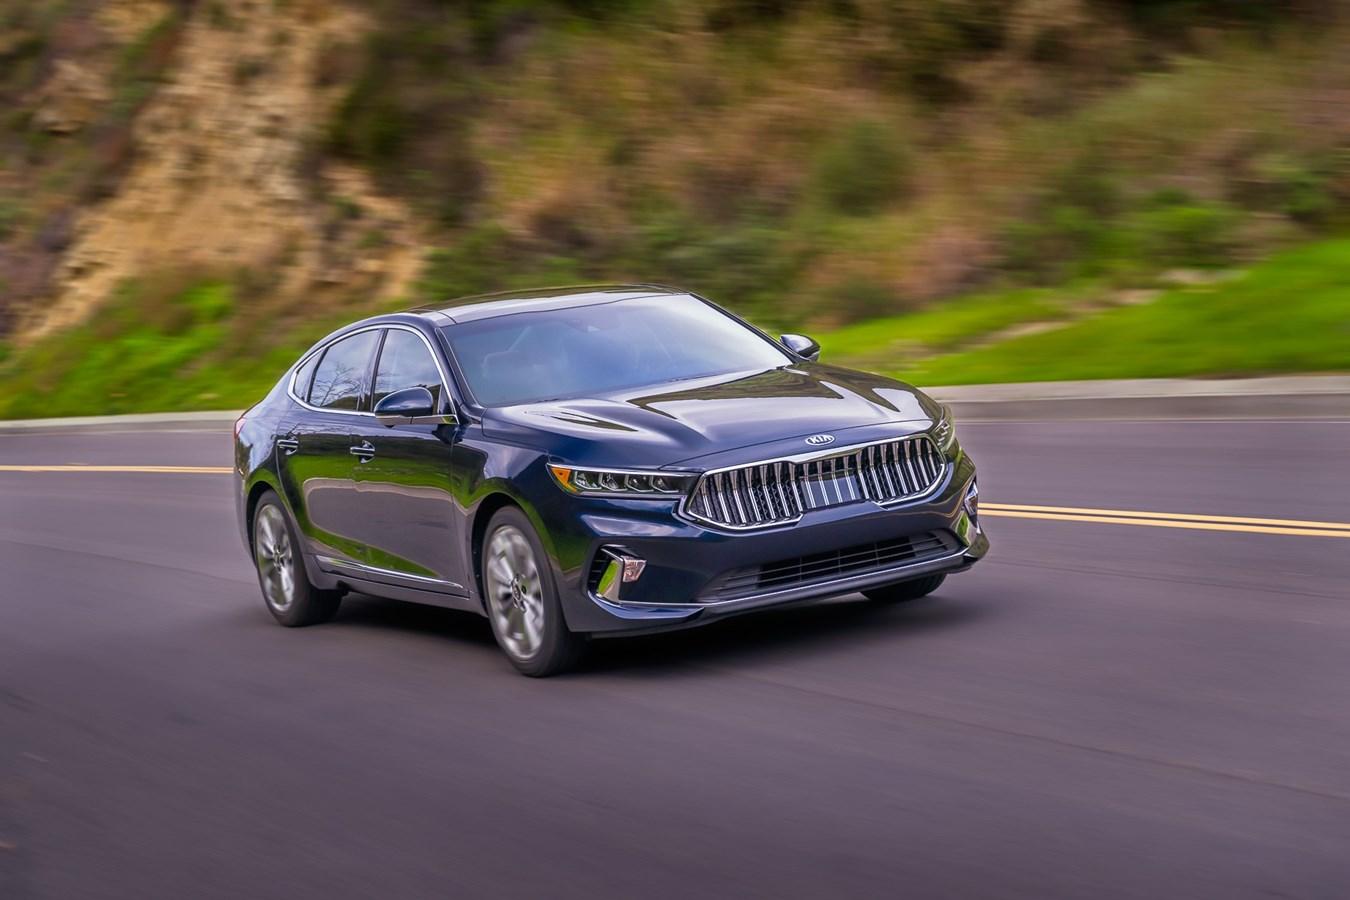 The 2020 Kia Cadenza has a luxury feel for a budget price, but it eventually got discontinued due to lack of sales.